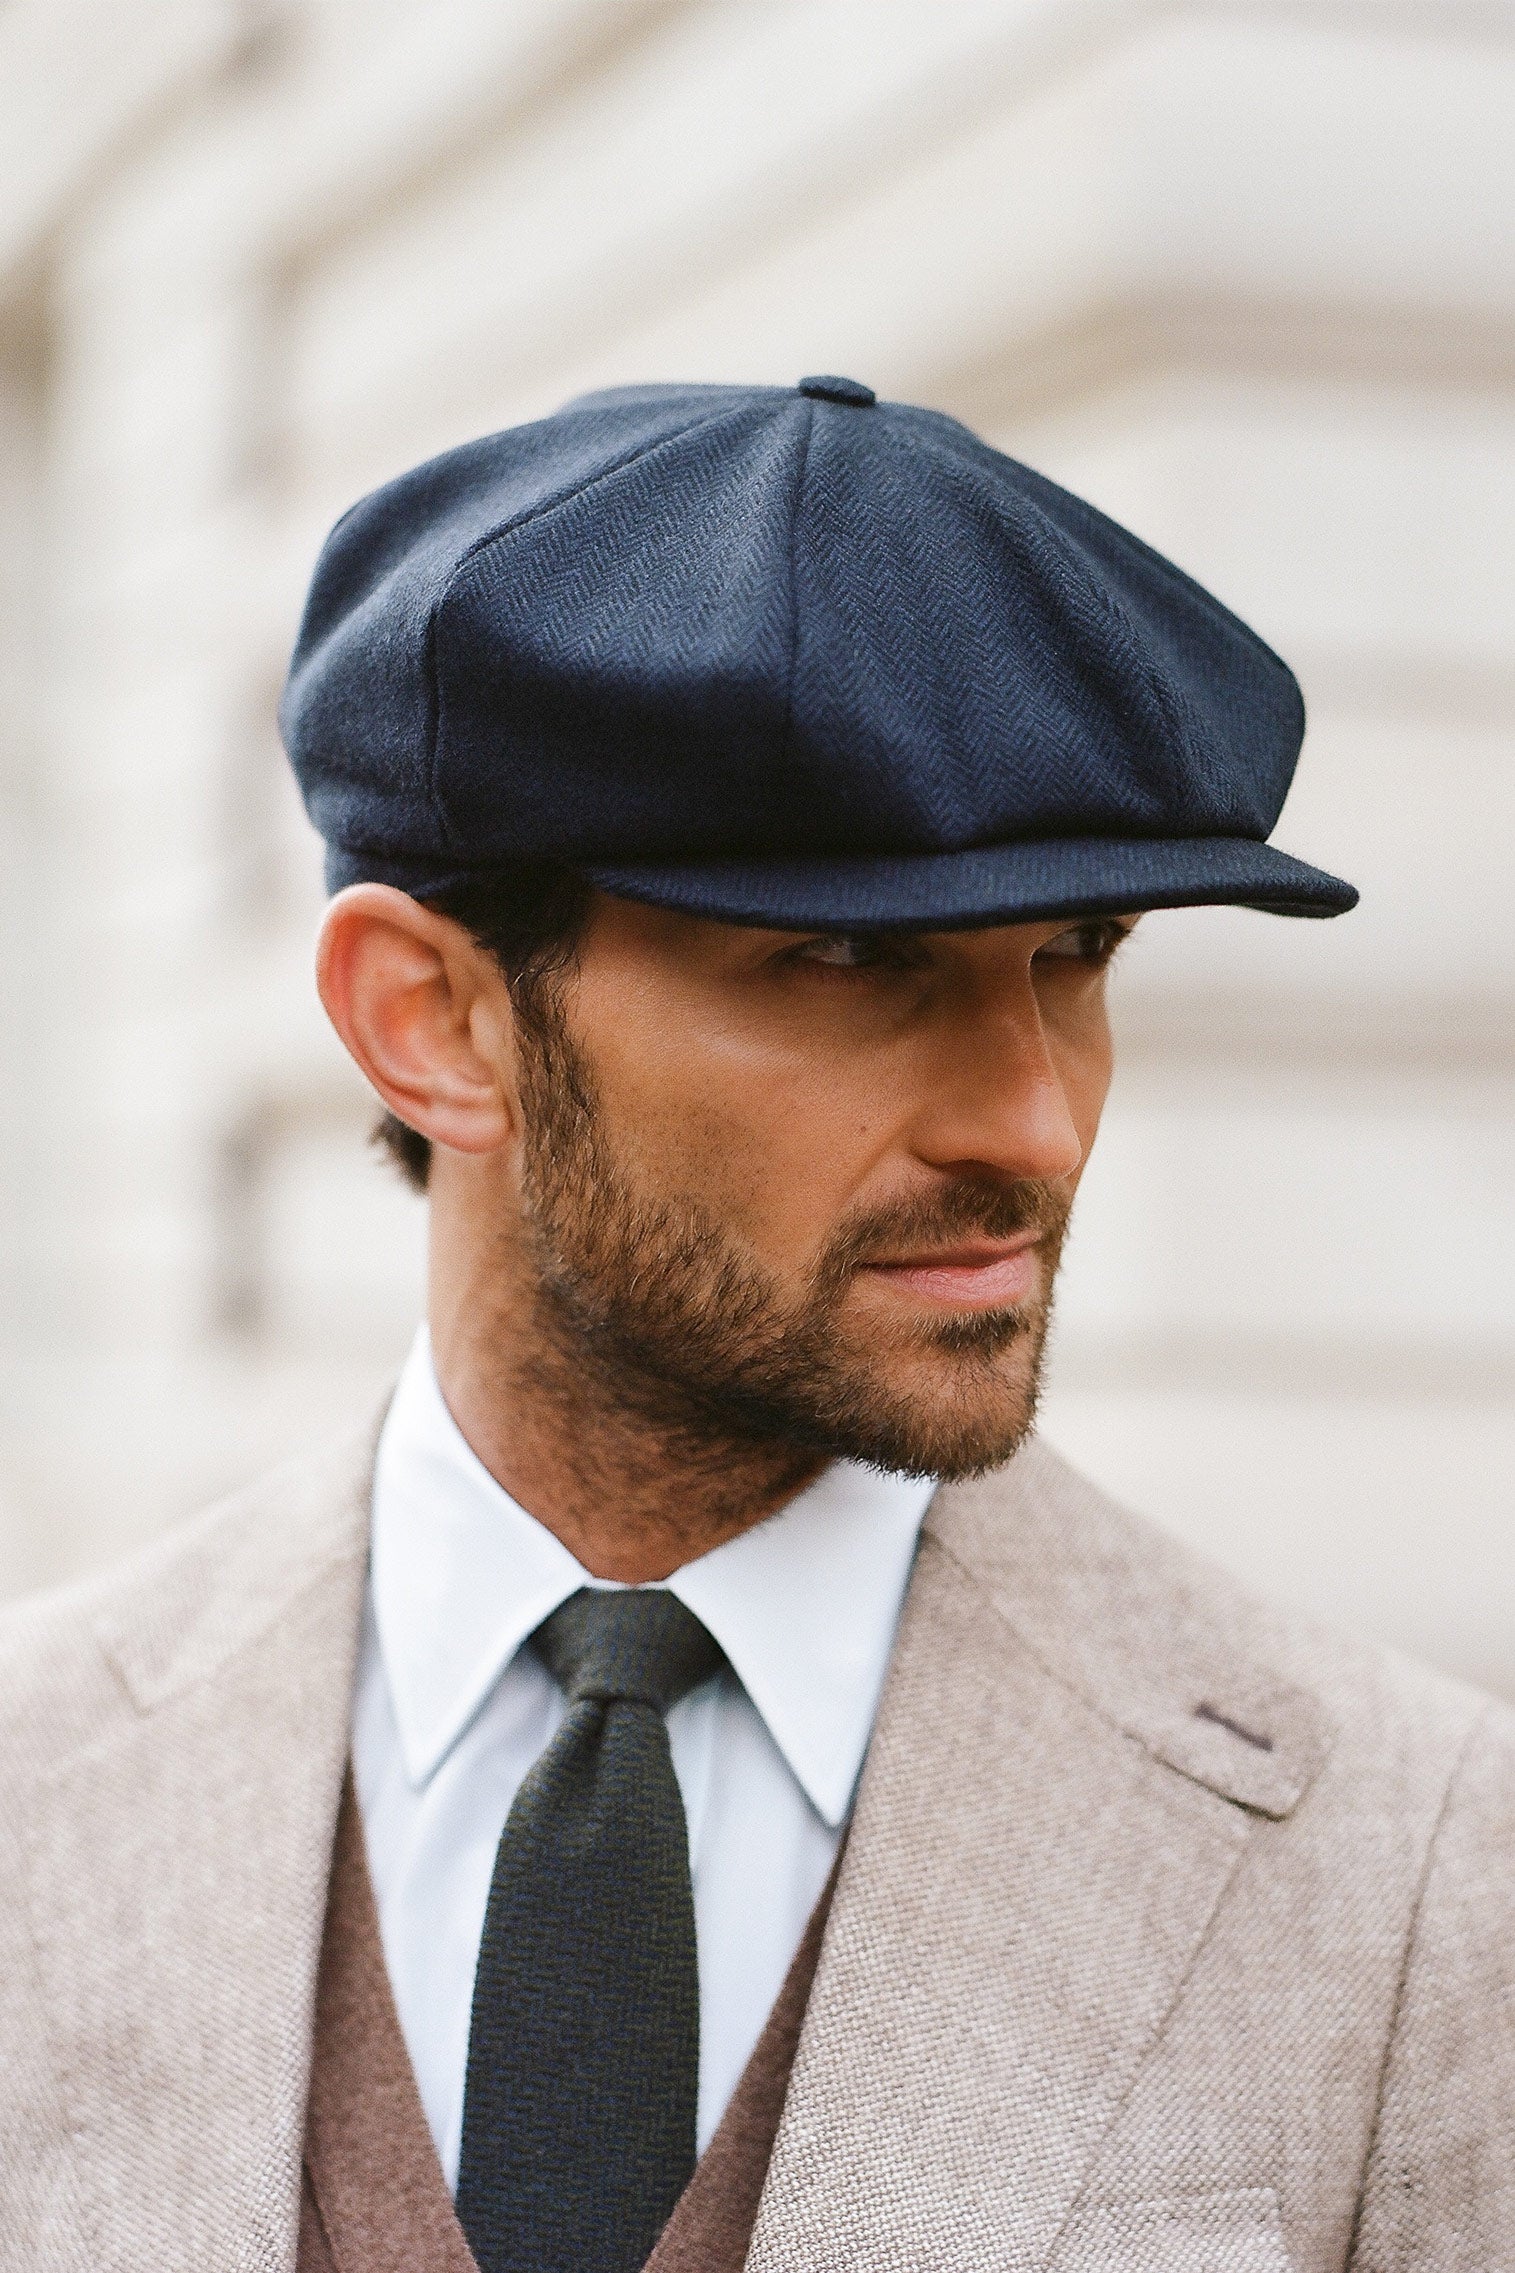 The Sixty - Hats for Tall People - Lock & Co. Hatters London UK